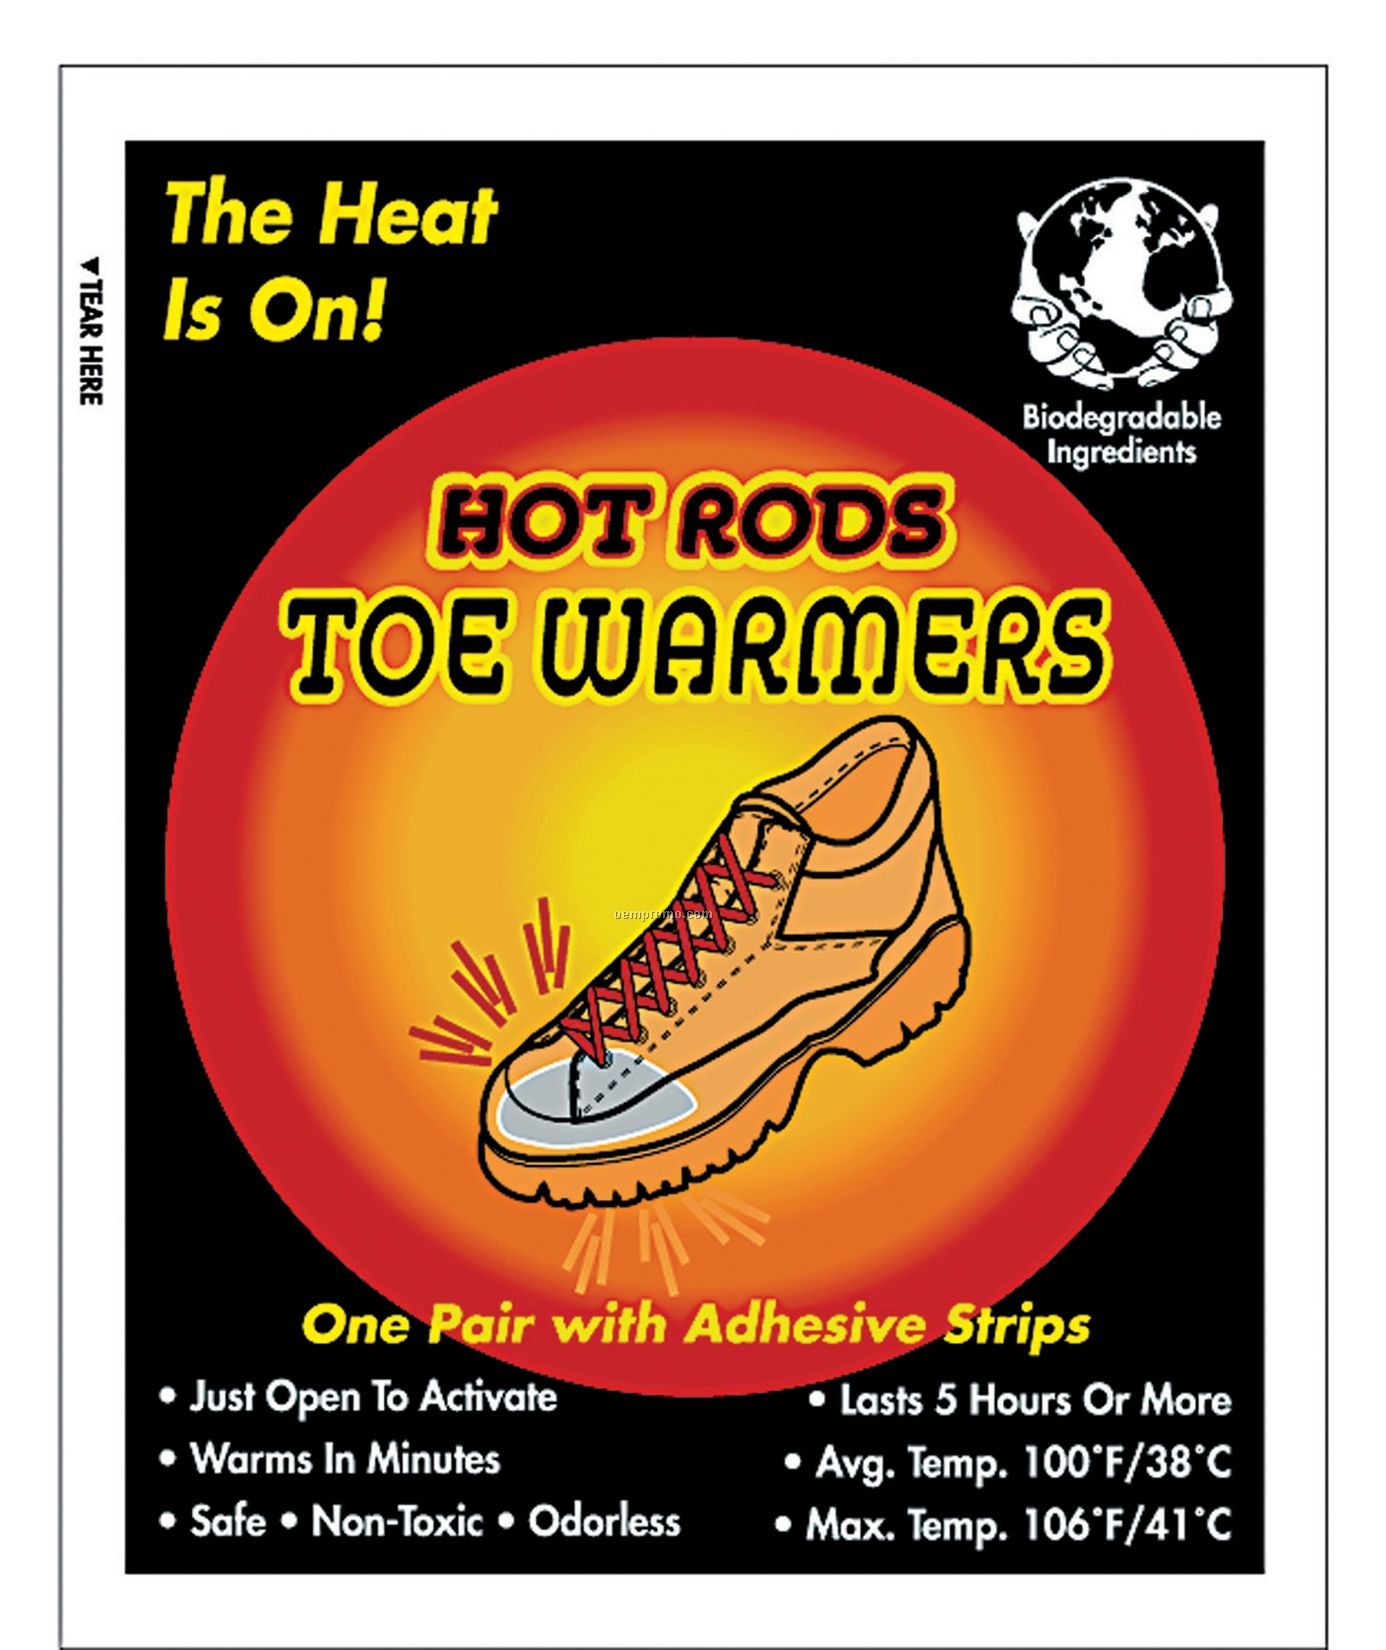 Hot Rods Warming Pack Display W/ 40 Pair - Hand Warmers